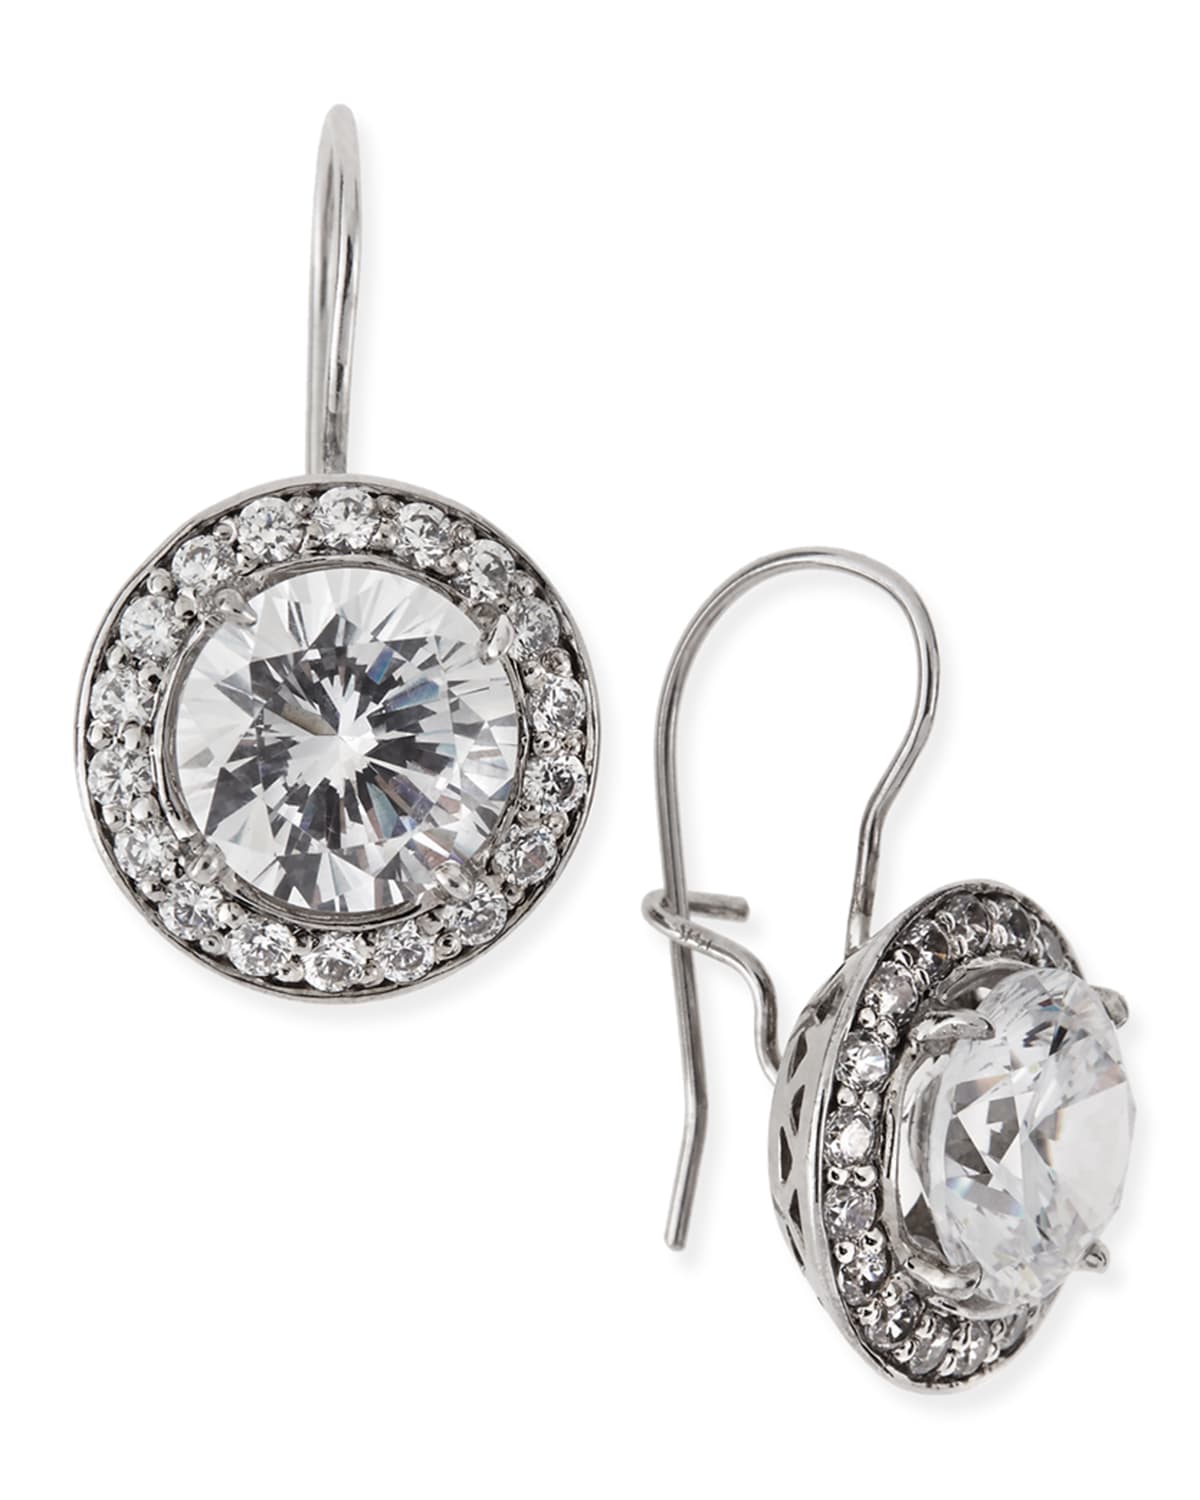 Fantasia By Deserio Antique-inspired Round Cubic Zirconia Earrings In Clear